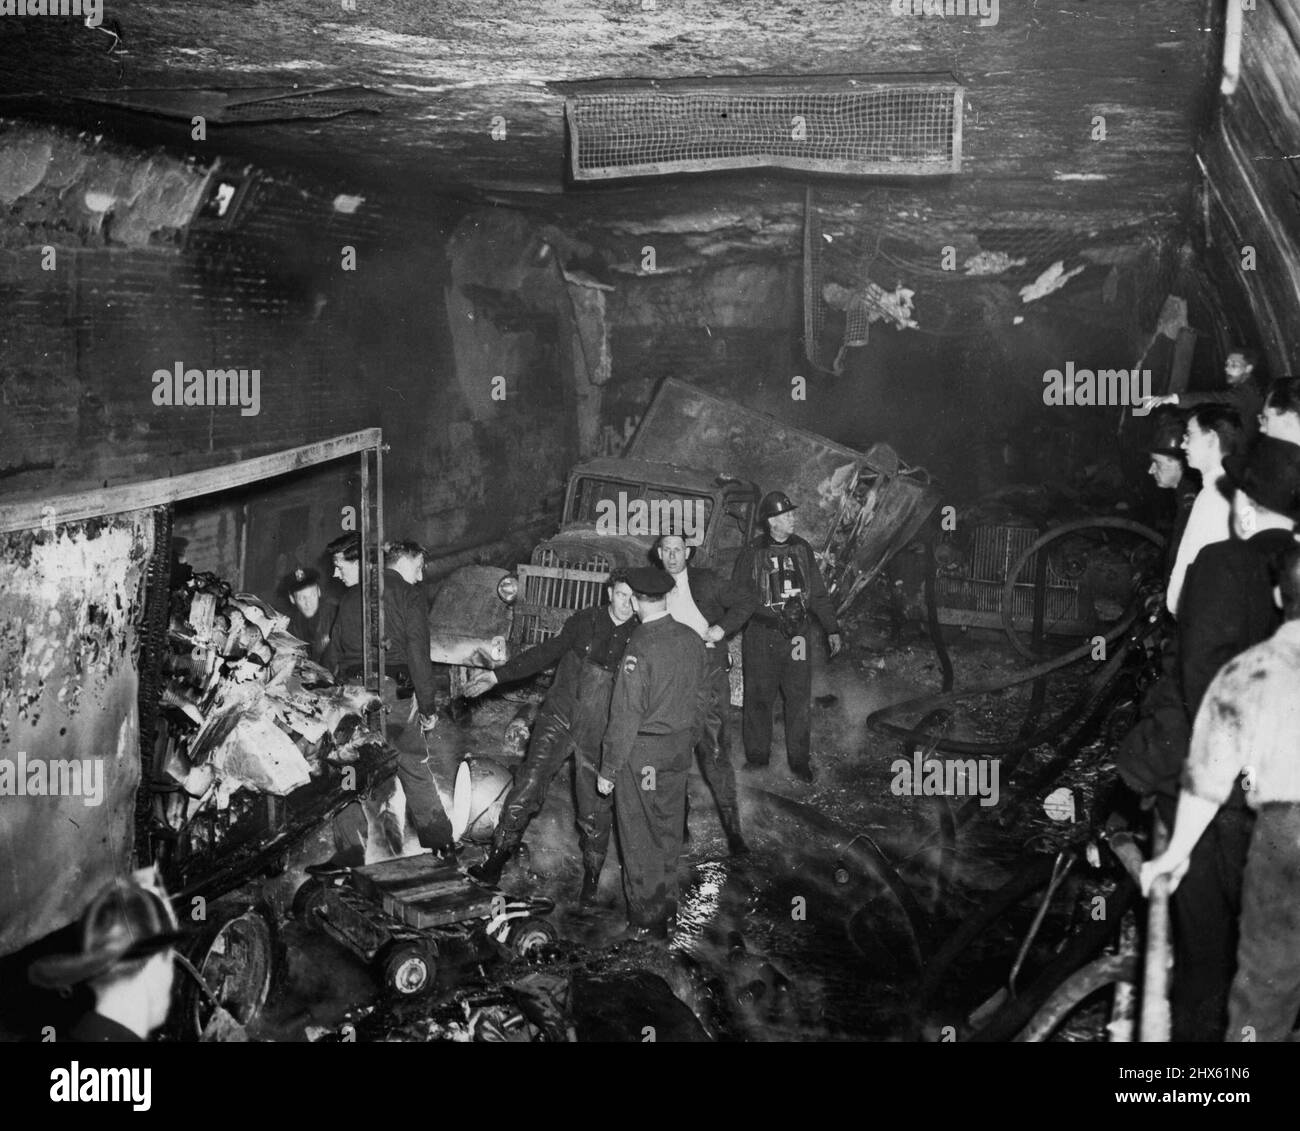 Trucks Blast Rips Holland Tunnel. Debris Litters the Holland Tunne's east bound tube, May 13, following an explosion of drums of chemicals on a truck. The explosion was touches off when the truck (center) caught fire near the New Jersey end of the Tunnel. Flames spread to other trucks and the under water highway was filled with carbon disulphide fumes. Firemen wearing gas masks brought the fire under control. May 13, 1949. (Photo by Associated Press Photo).;Trucks Blast Rips Holland Tunnel. Debr Stock Photo